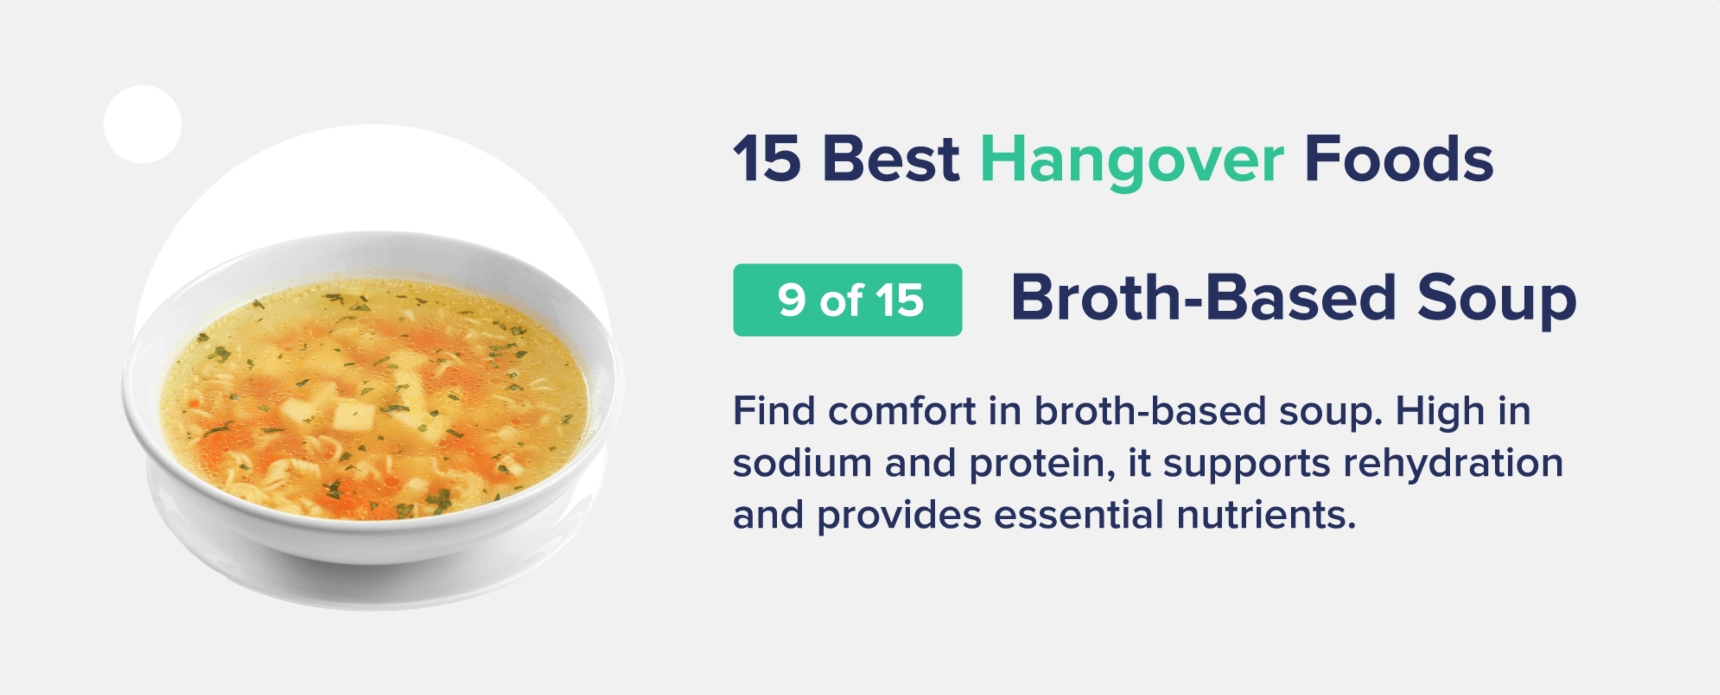 broth-based soup best hangover foods